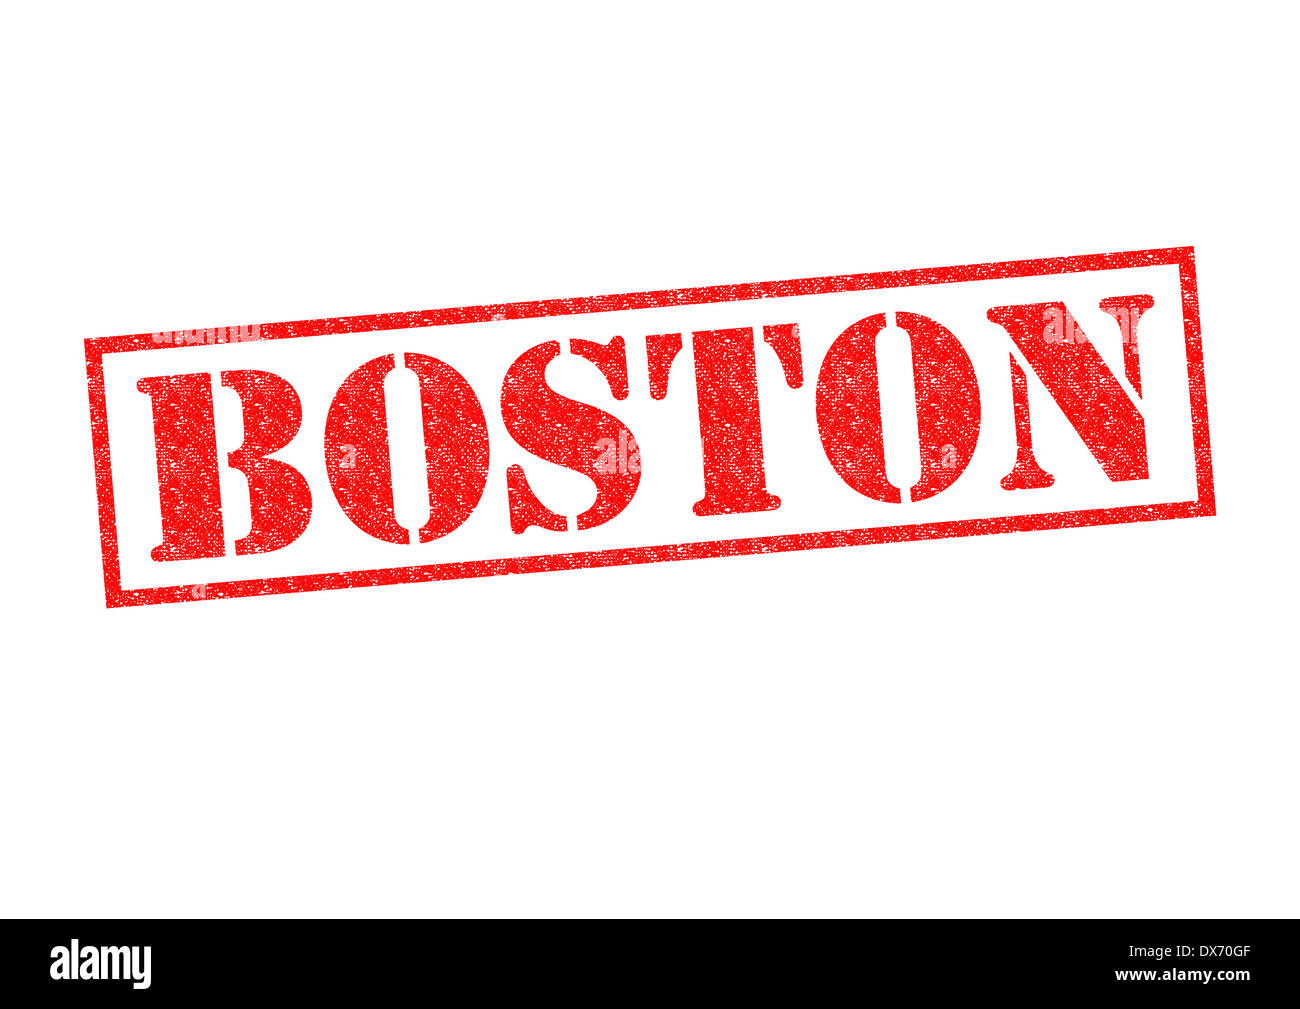 BOSTON Rubber Stamp over a white background. Stock Photo